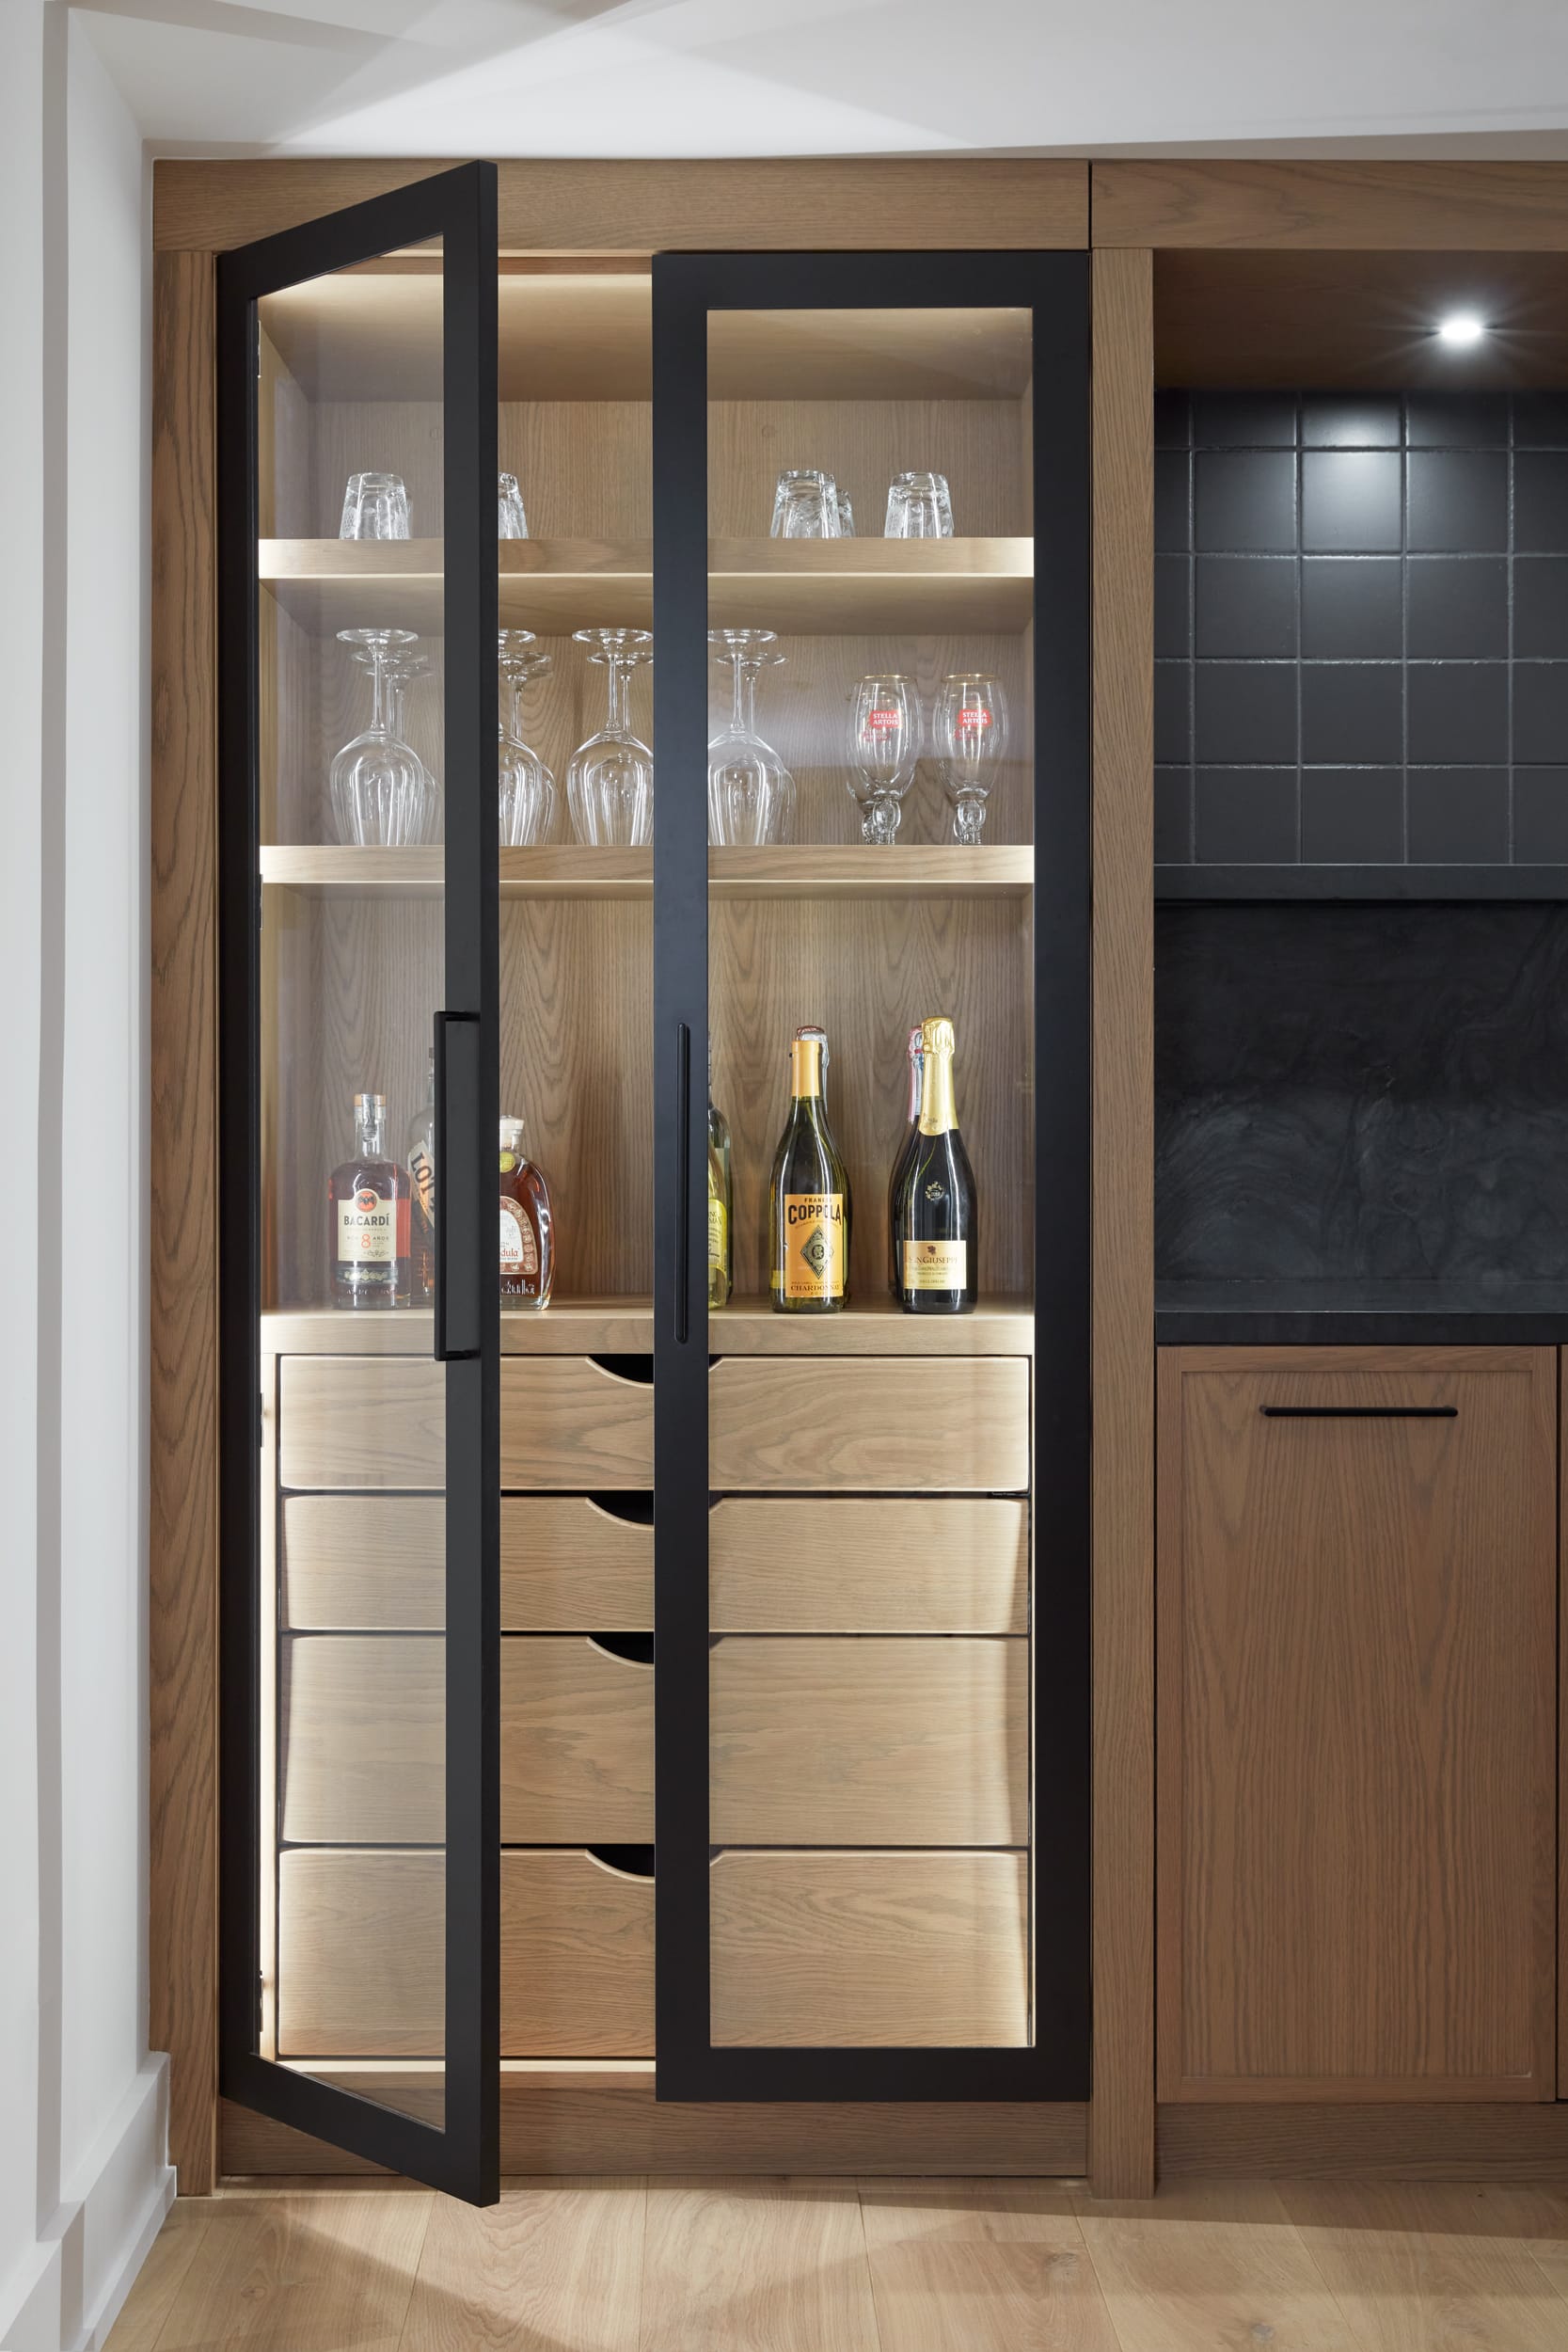 A transitional white oak basement bar with black and glass doors